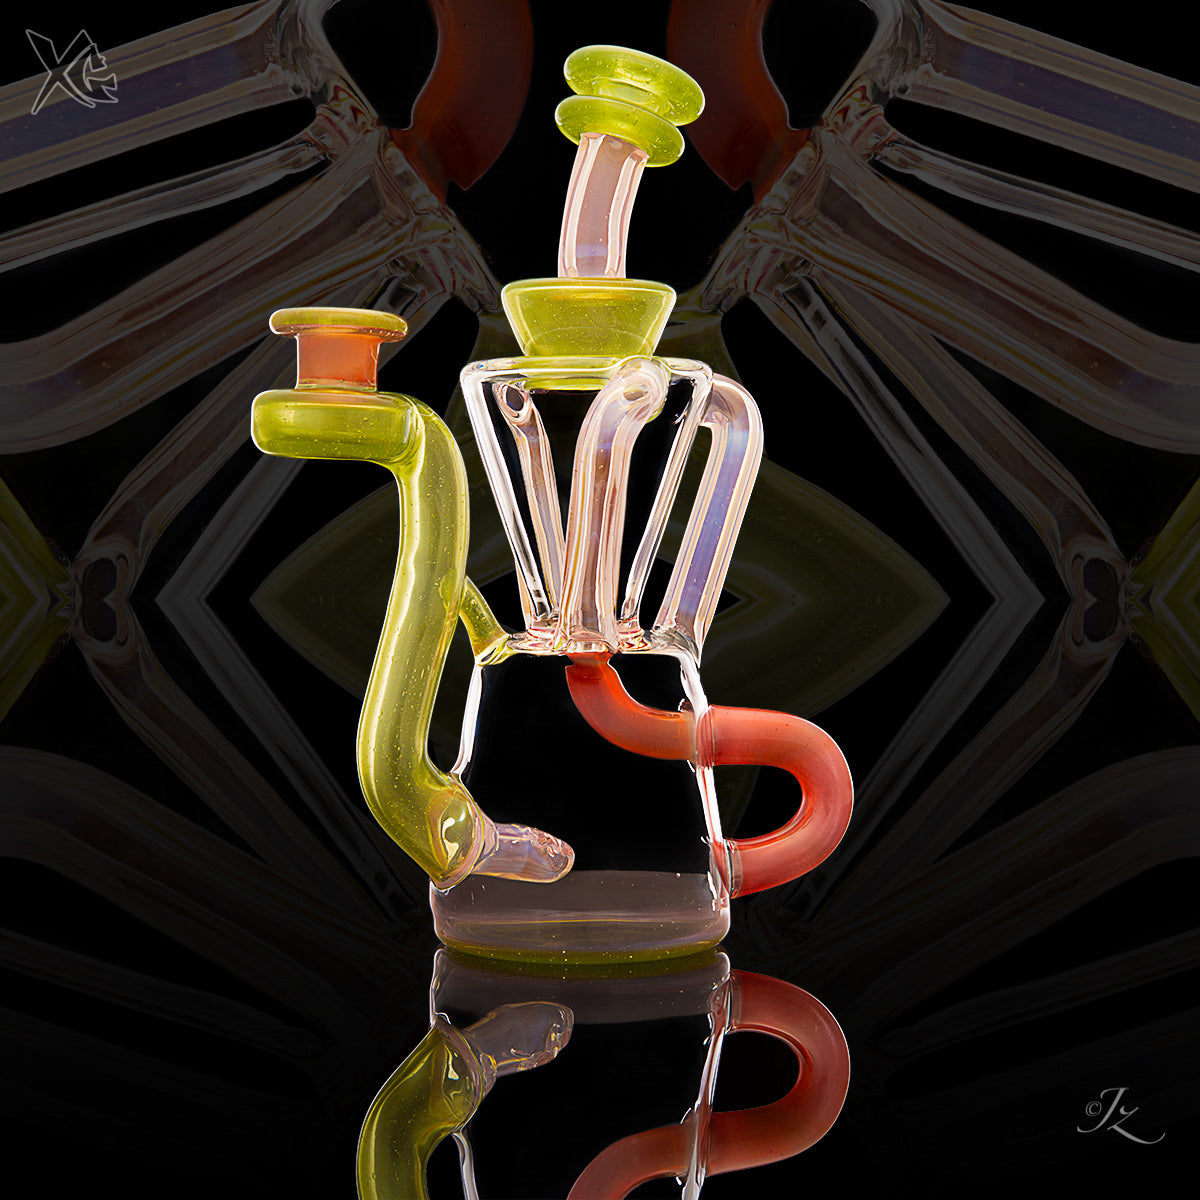 Triple Recycler - Heart and Mind Glass